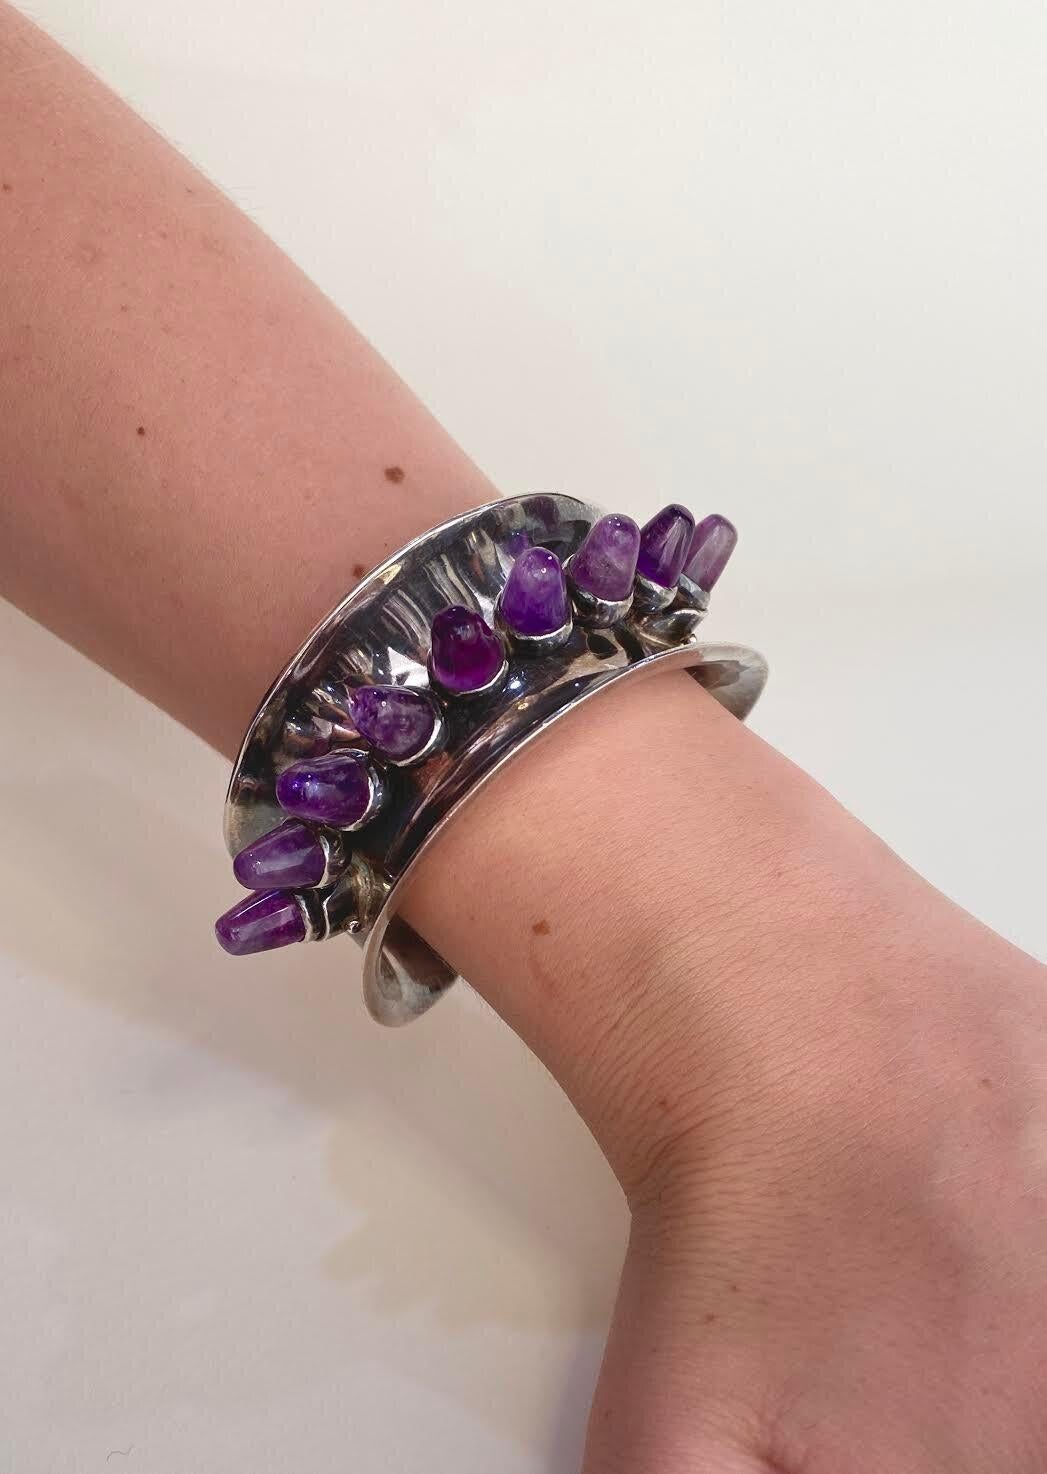 Antonio Pineda 970. Silver and Amethyst Cuff Bracelet 

Expertly crafted Concave Cuff Bracelet with floating Amethyst Stones.

Mexican Modernist Design 

Designer: Antonio Pineda 
Maker: Antonio Pineda 
Circa: 1953-1979 
Dimensions: 6.5